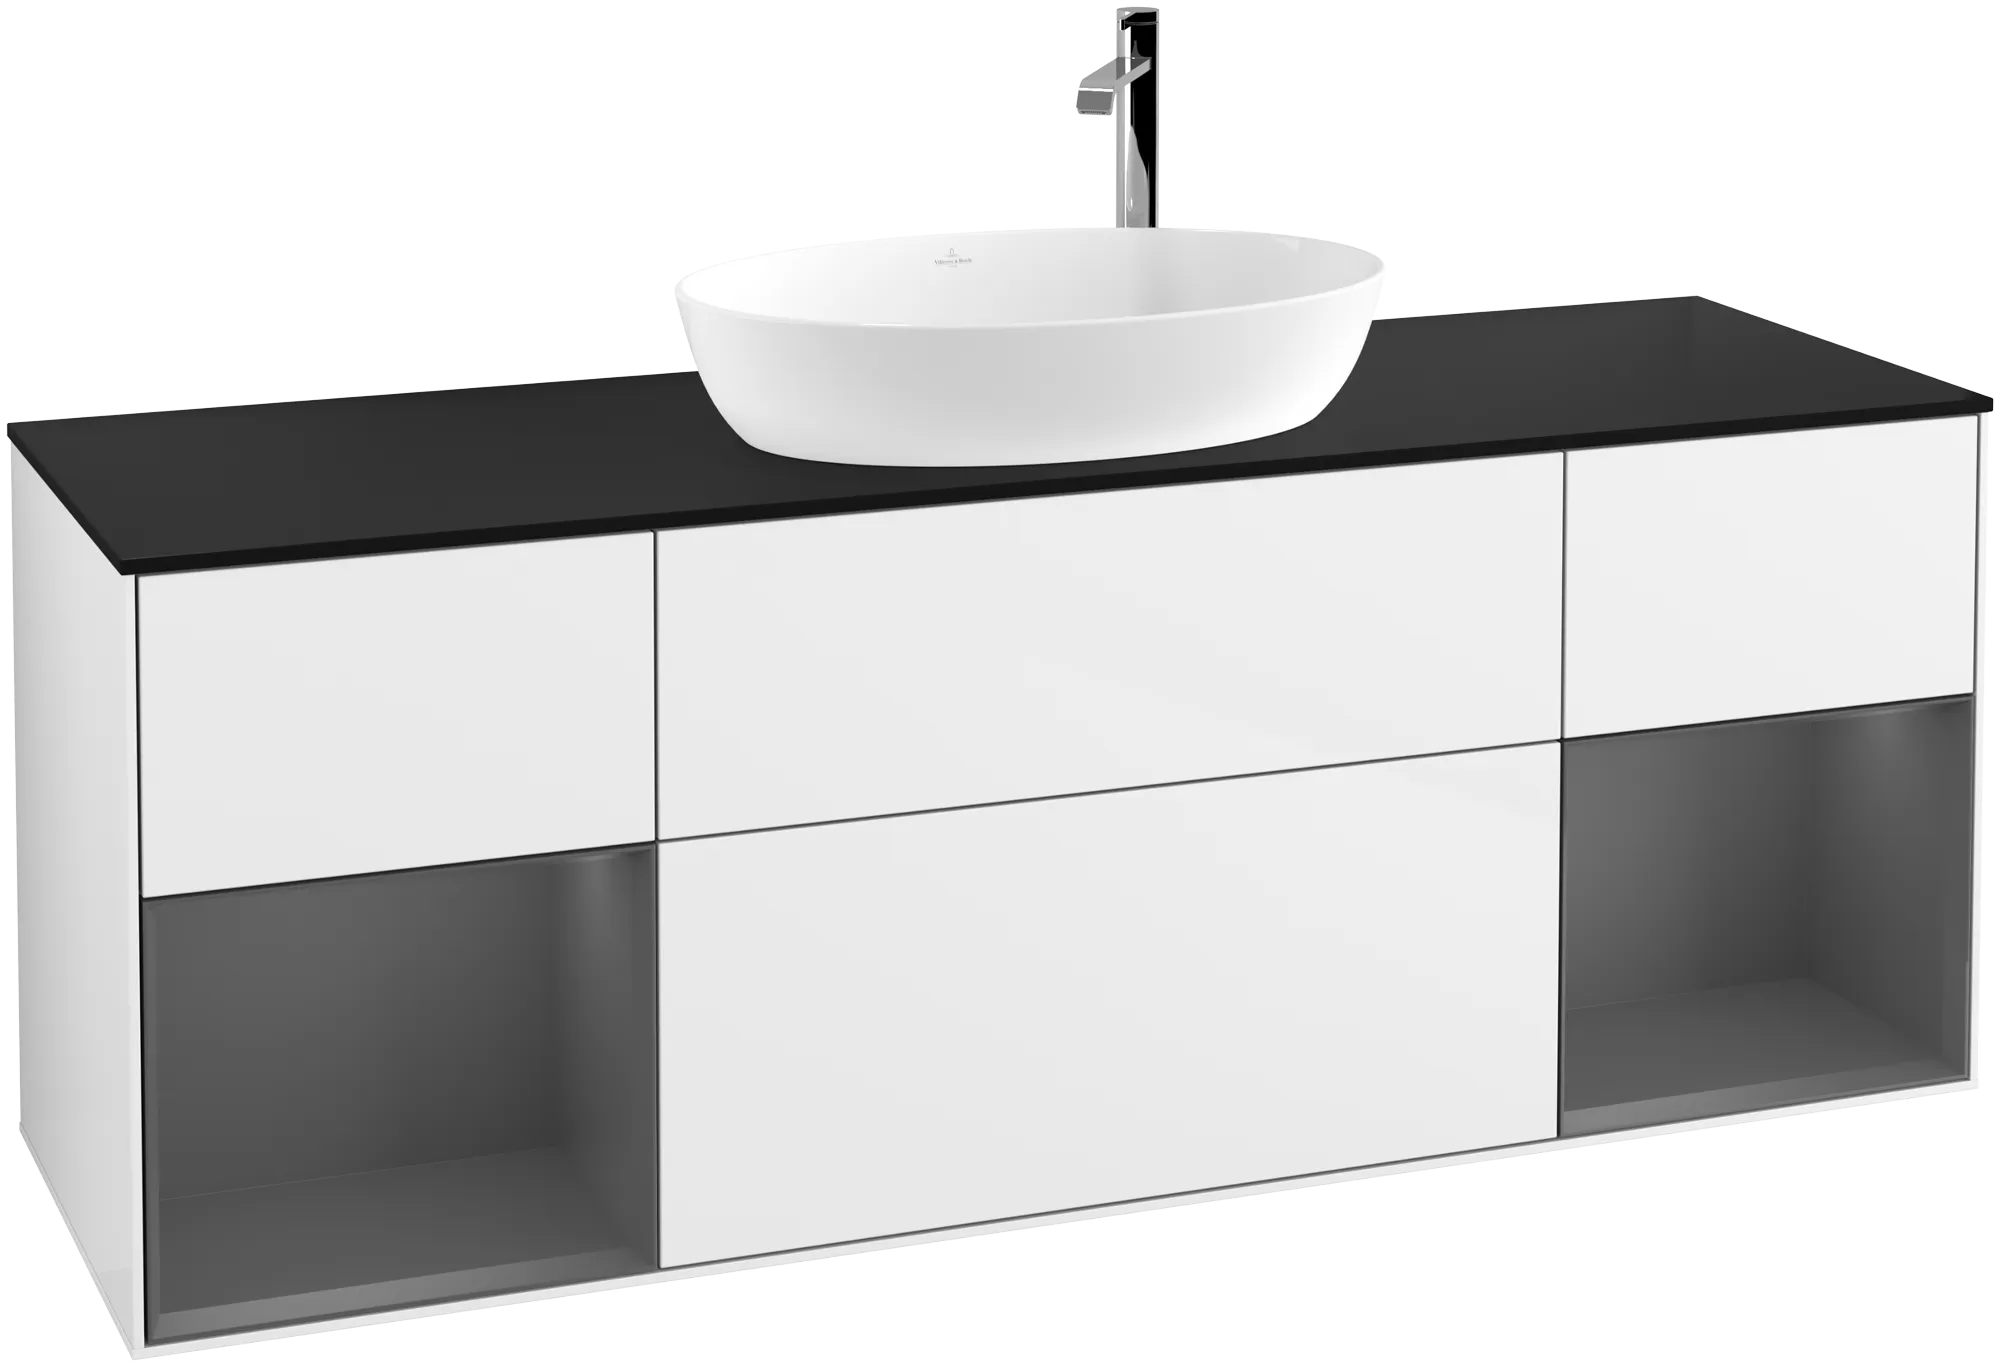 Зображення з  VILLEROY BOCH Finion Vanity unit, with lighting, 4 pull-out compartments, 1600 x 603 x 501 mm, Glossy White Lacquer / Anthracite Matt Lacquer / Glass Black Matt #G982GKGF